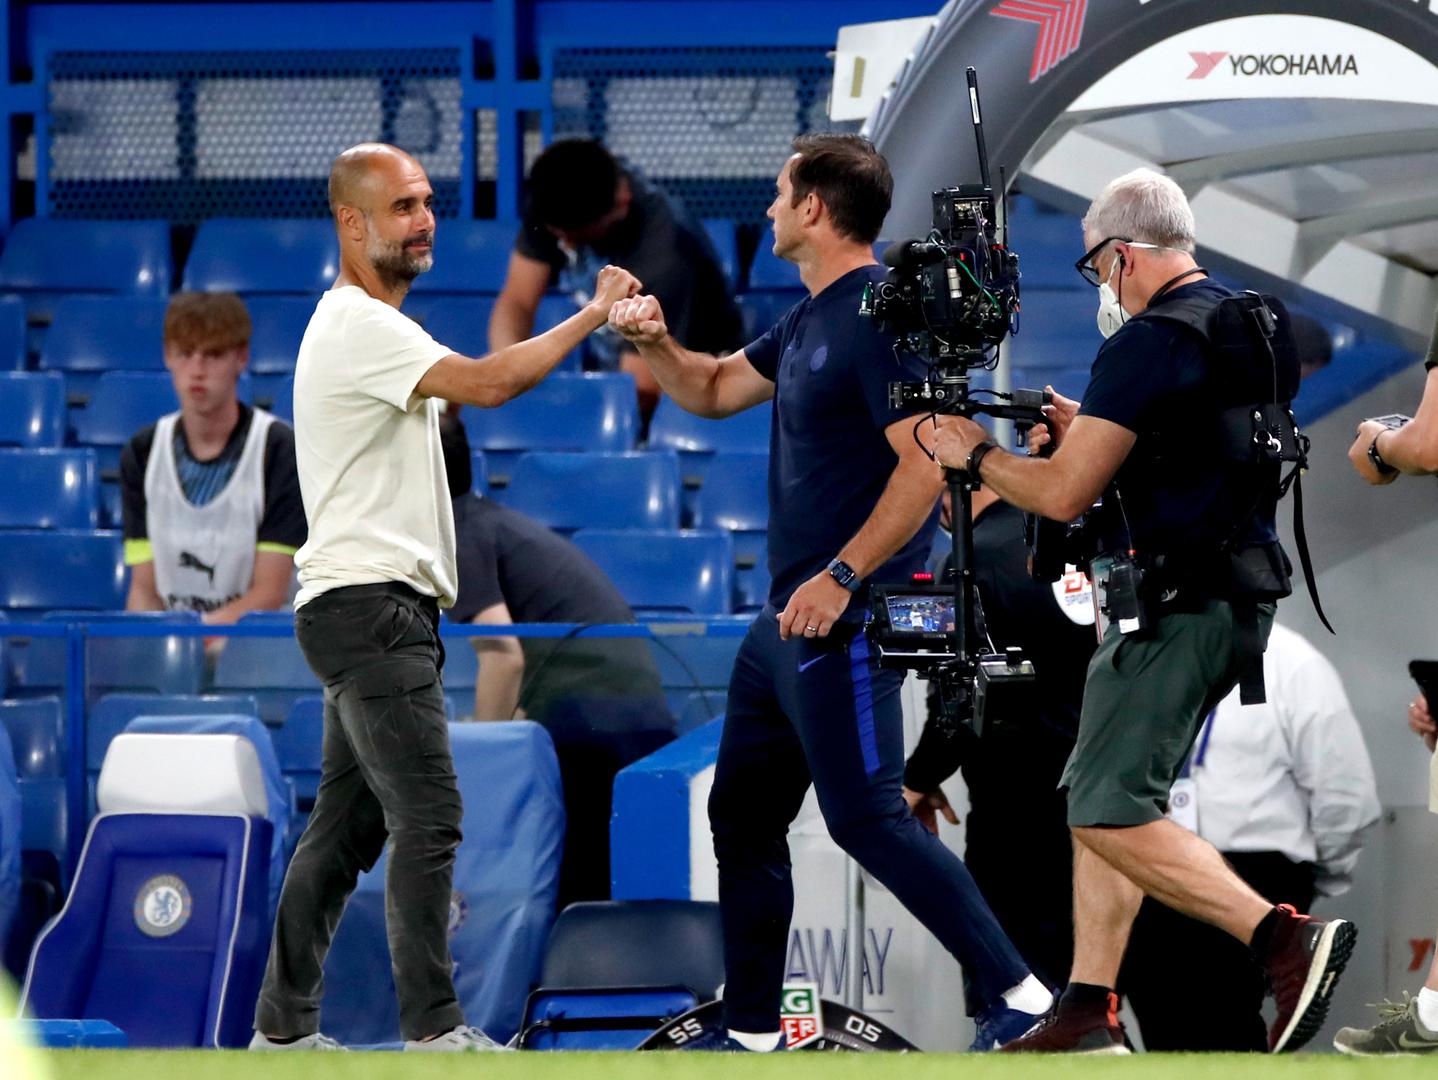 Chelsea v Manchester City - Premier League - Stamford Bridge Manchester City manager Pep Guardiola (left) fist bumps Chelsea manager Frank Lampard (right) after the final whistle after the Premier League match at Stamford Bridge, London. Paul Childs/NMC Pool  Photo: PA Images/PIXSELL